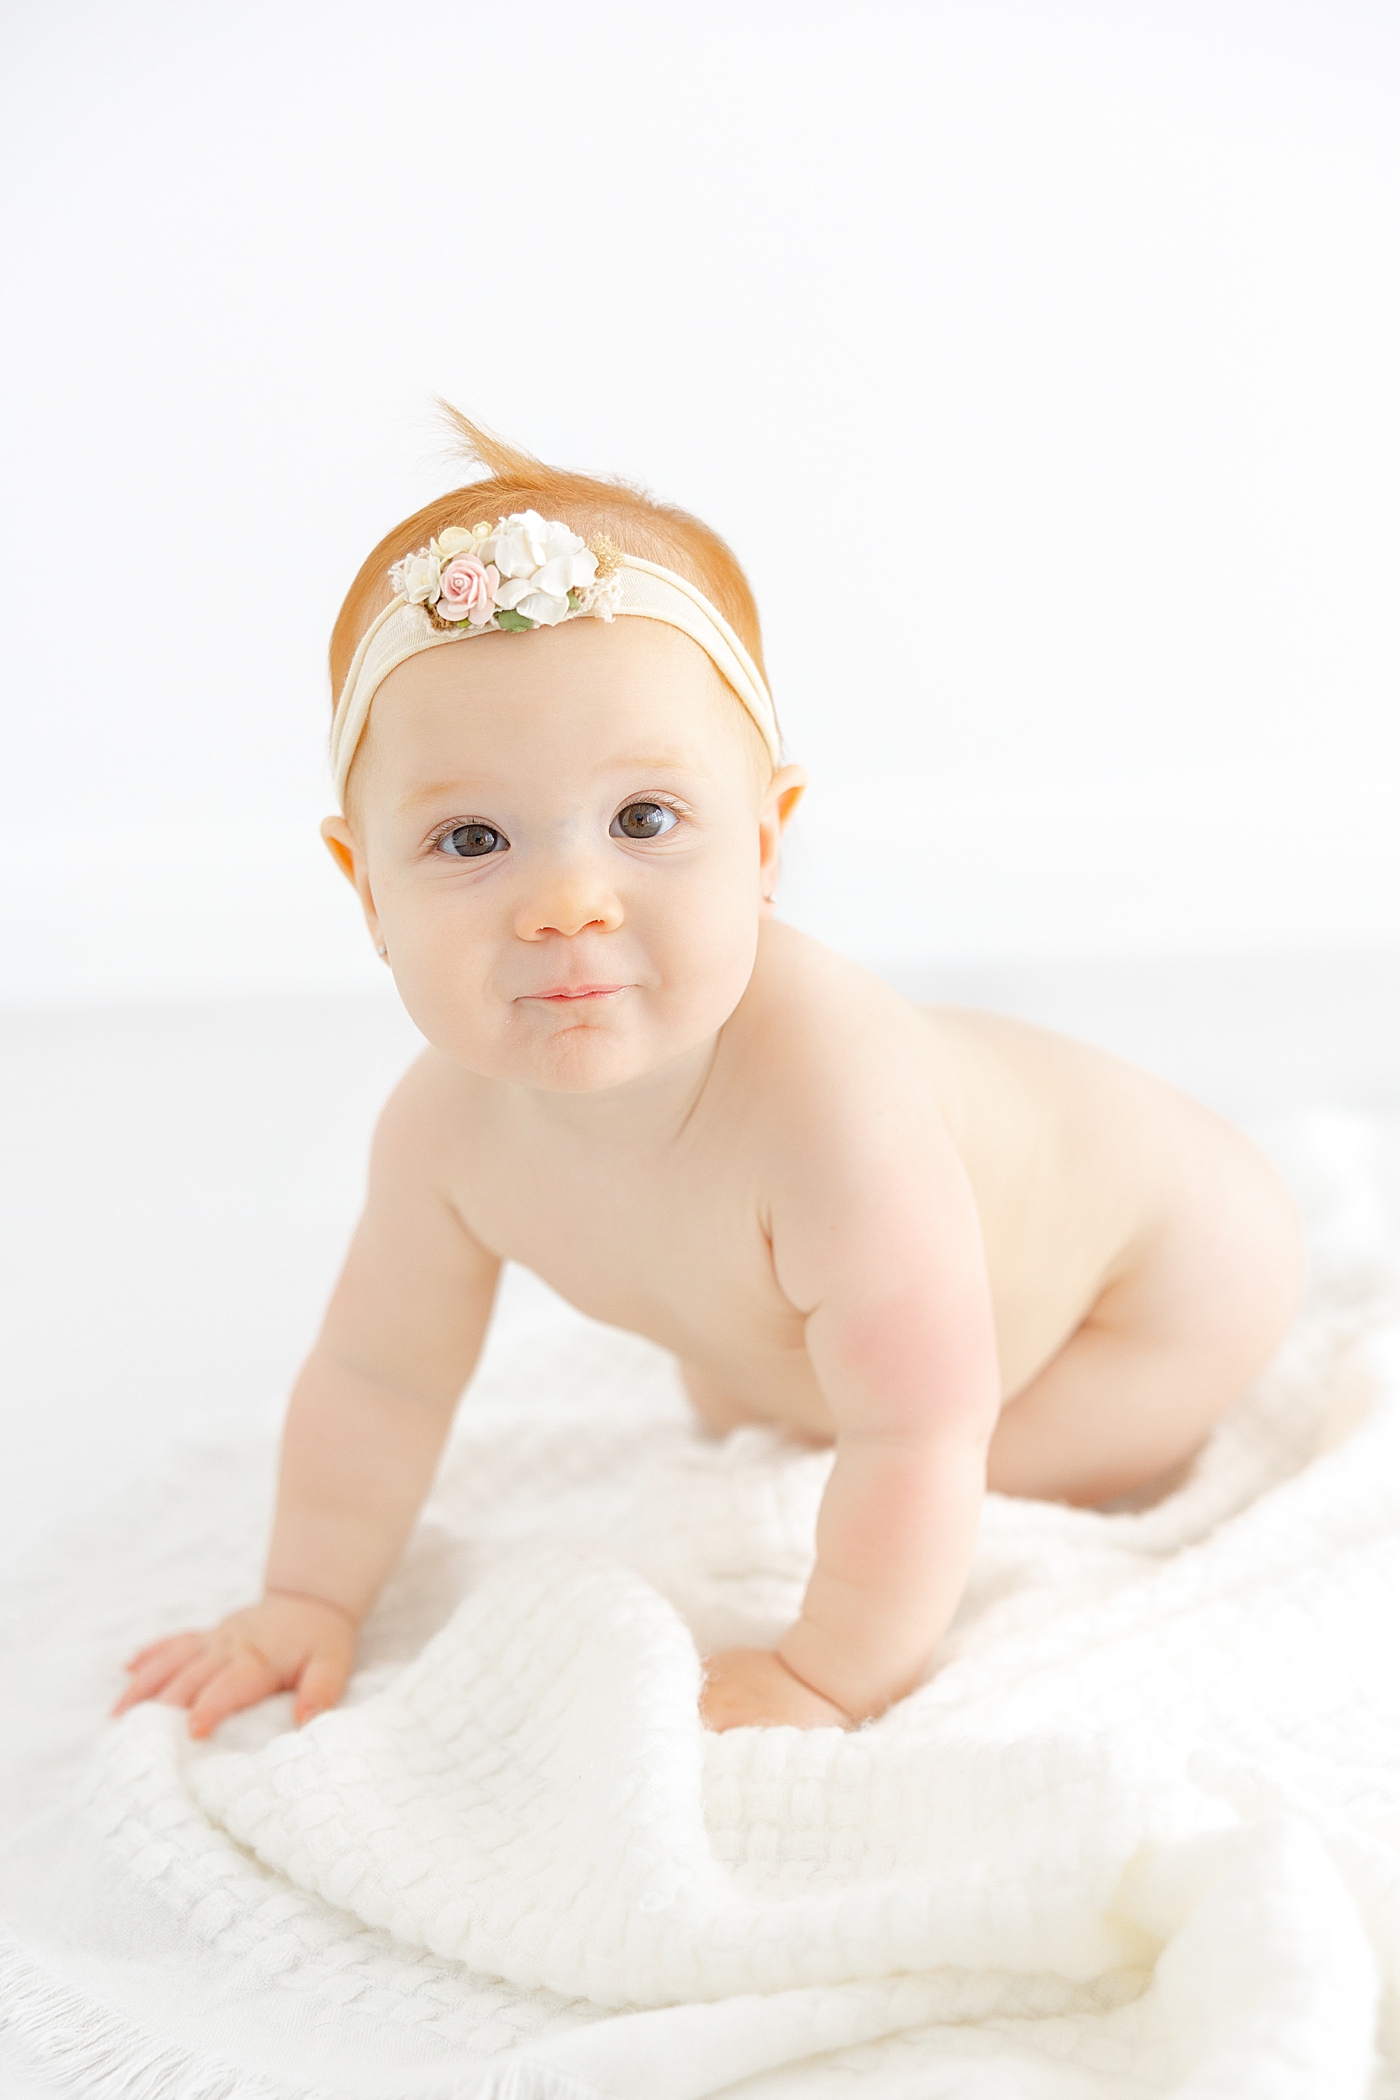 Baby girl with a floral headband on a white blanket | Image by Sana Ahmed Photography